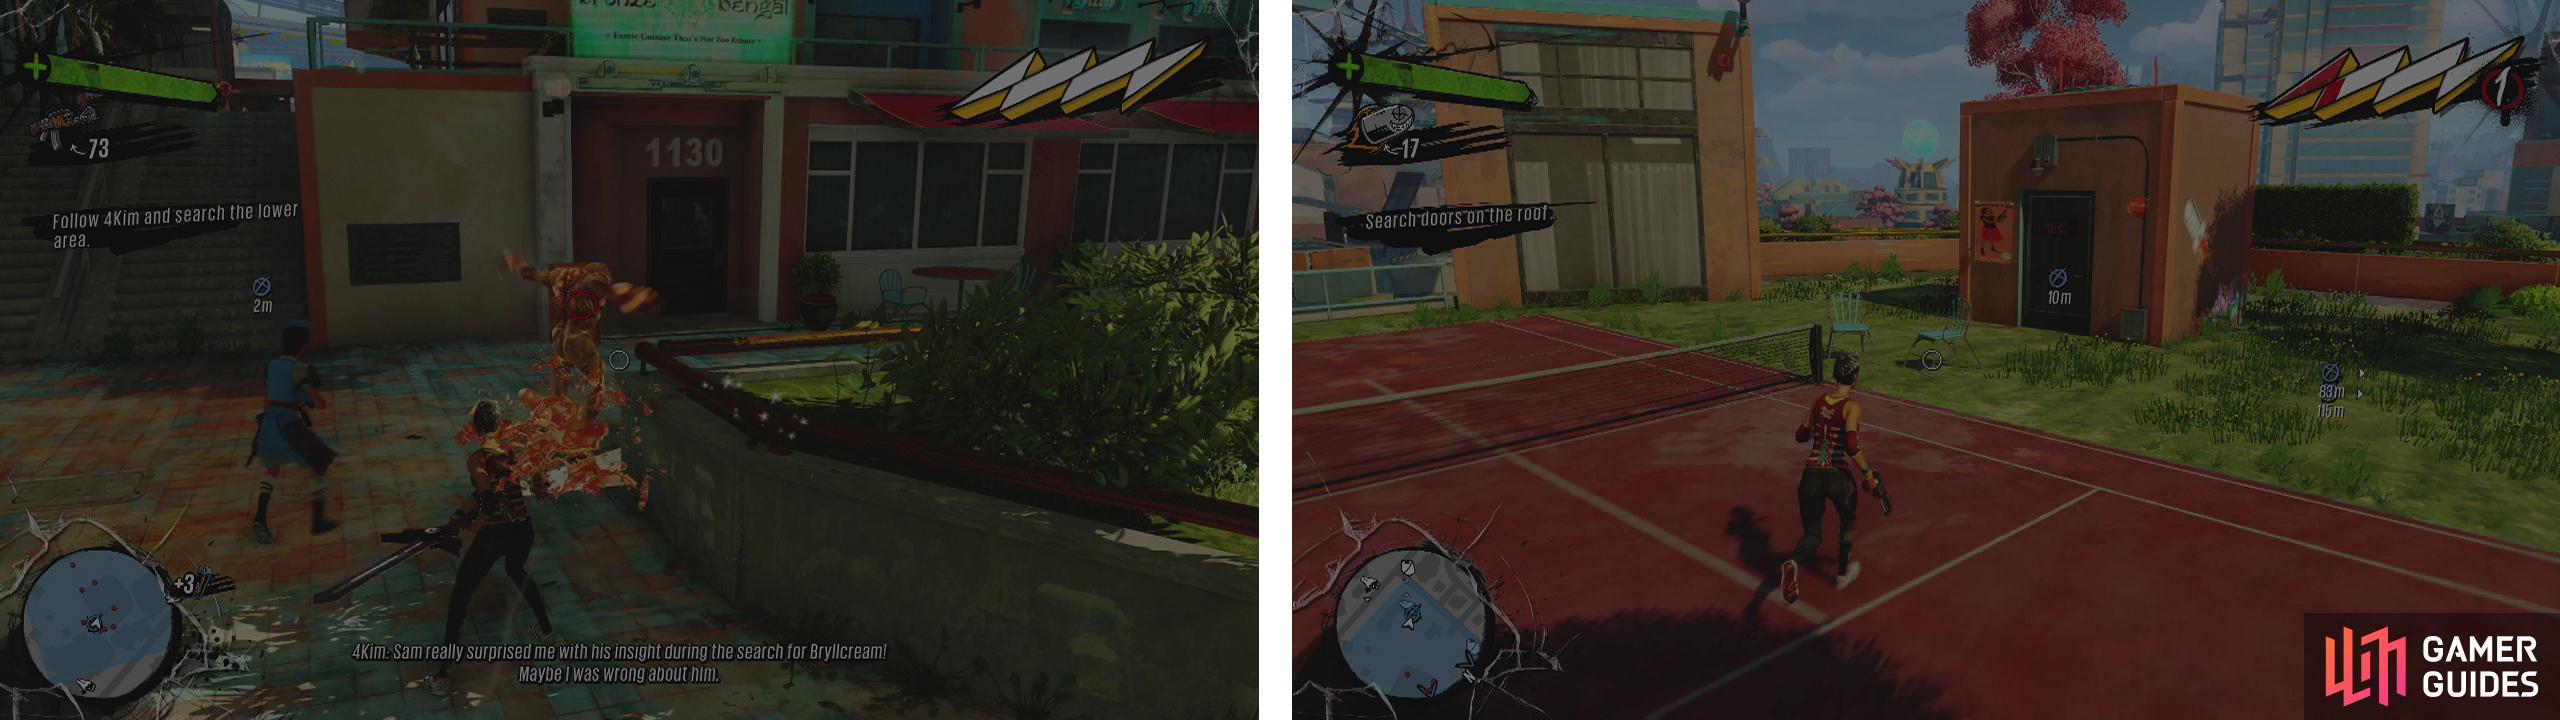 Escort 4Kim through the base of the apartment blocks (left). Climb to the roof and interact with the door by the tennis court (right).